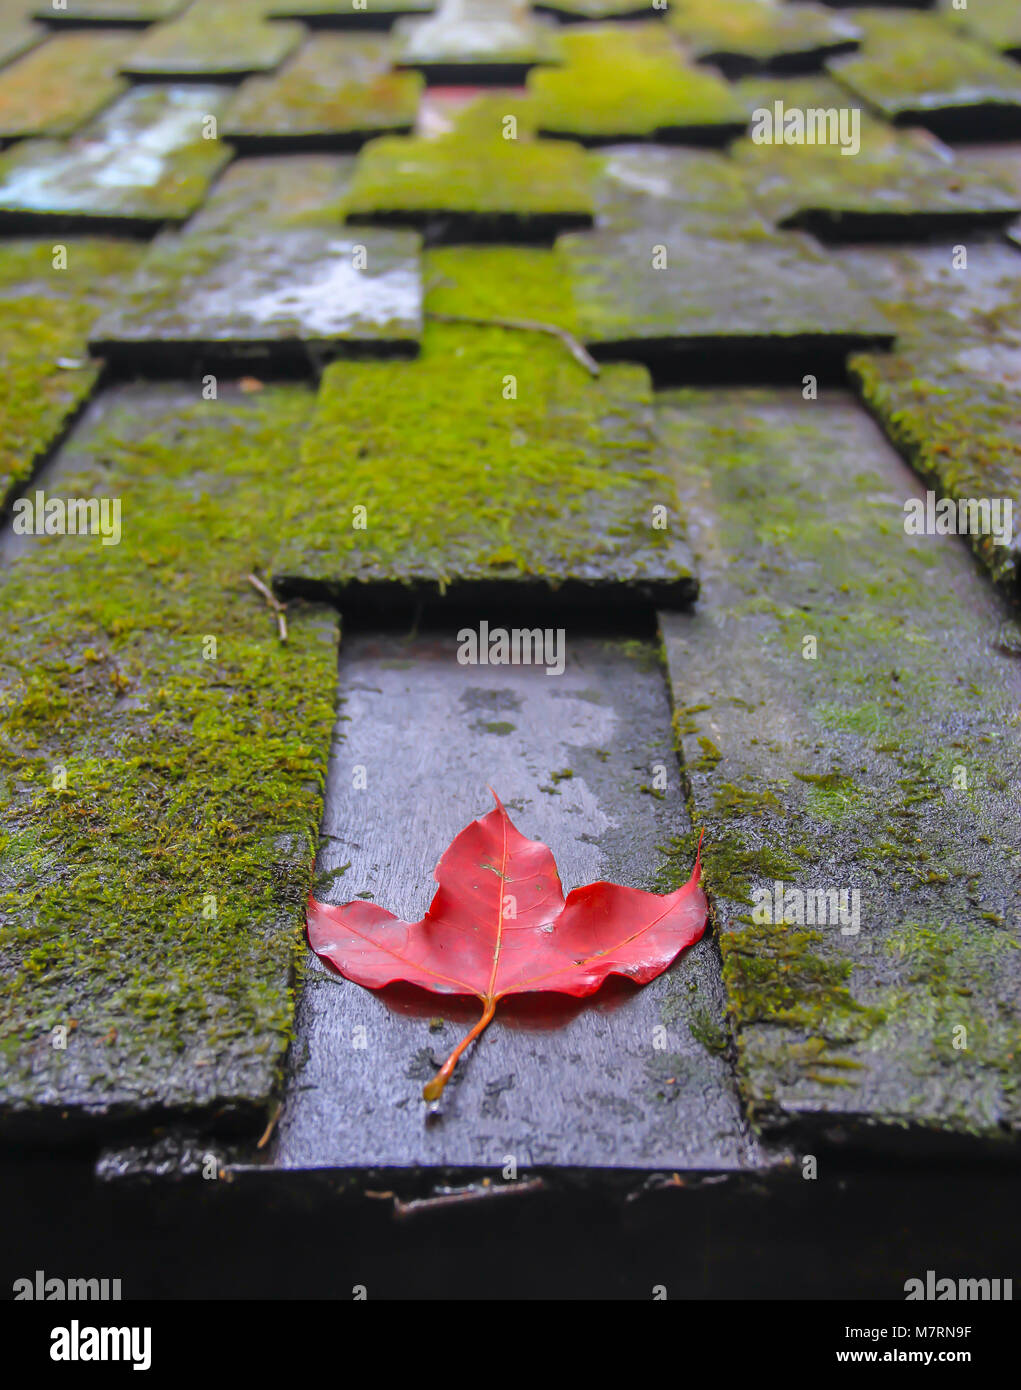 a red maple leaf on the wooden shingles roof coverd in moss Stock Photo